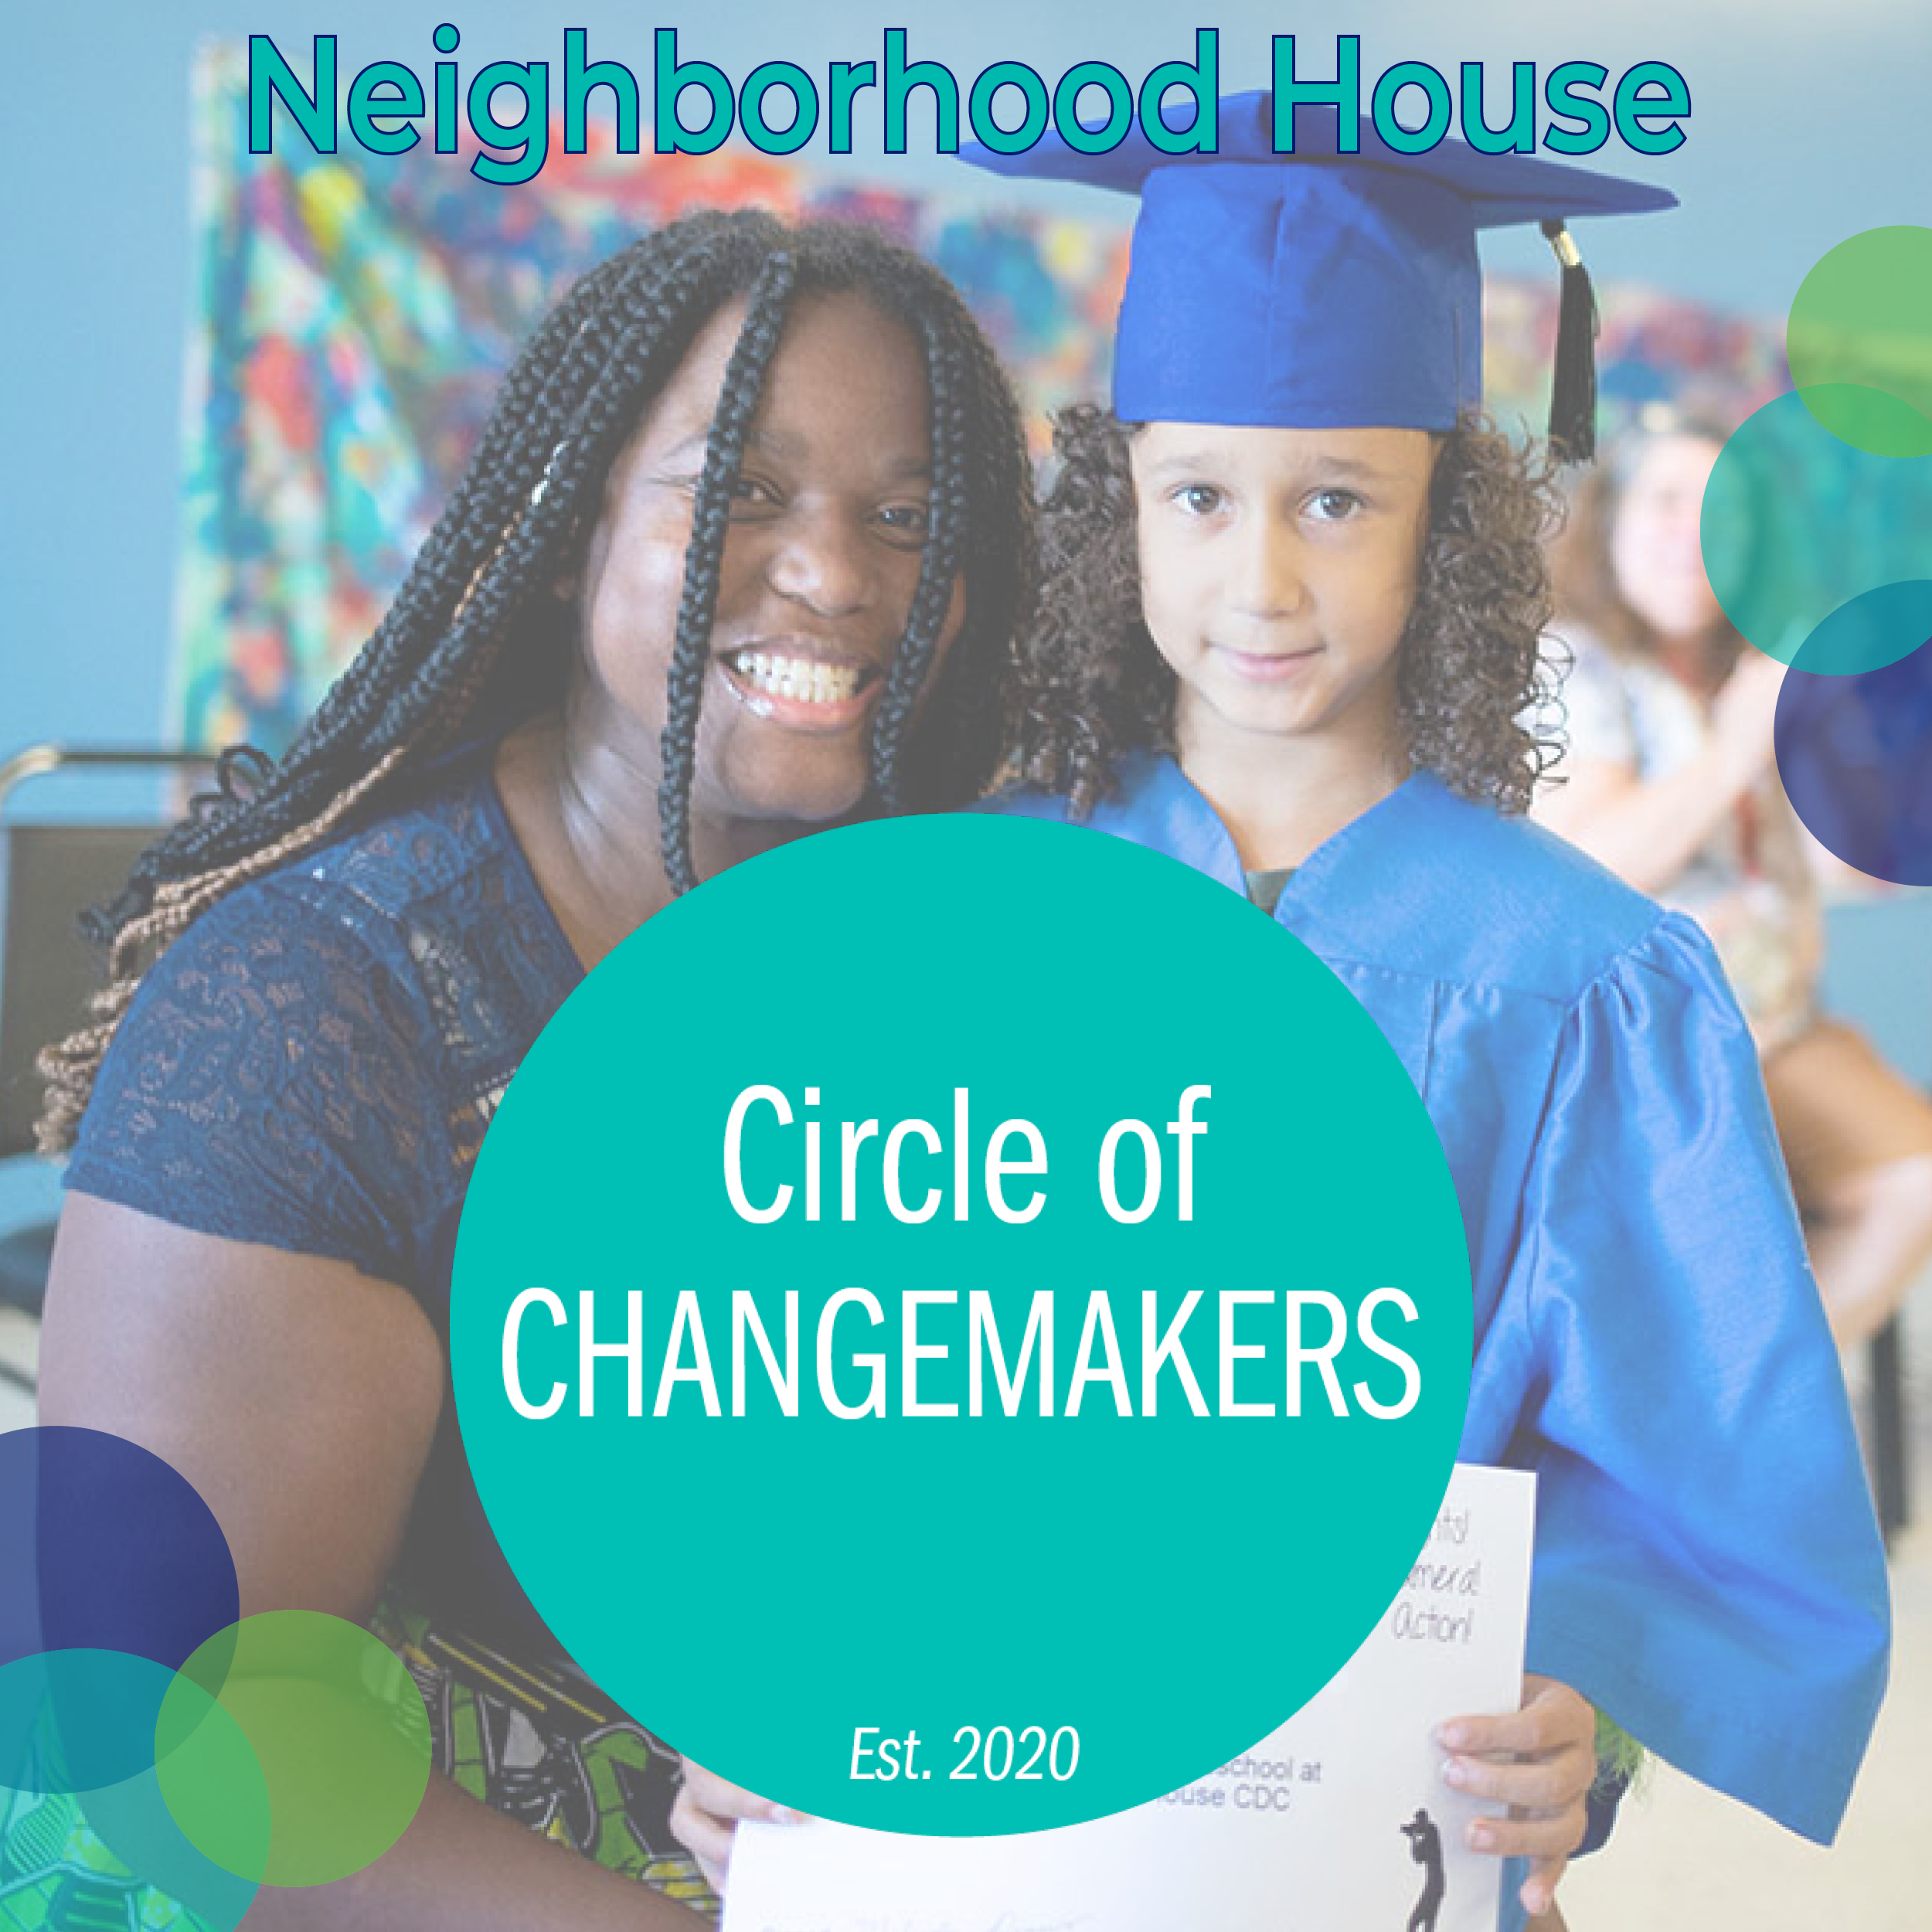 Introducing the Circle of Changemakers Image